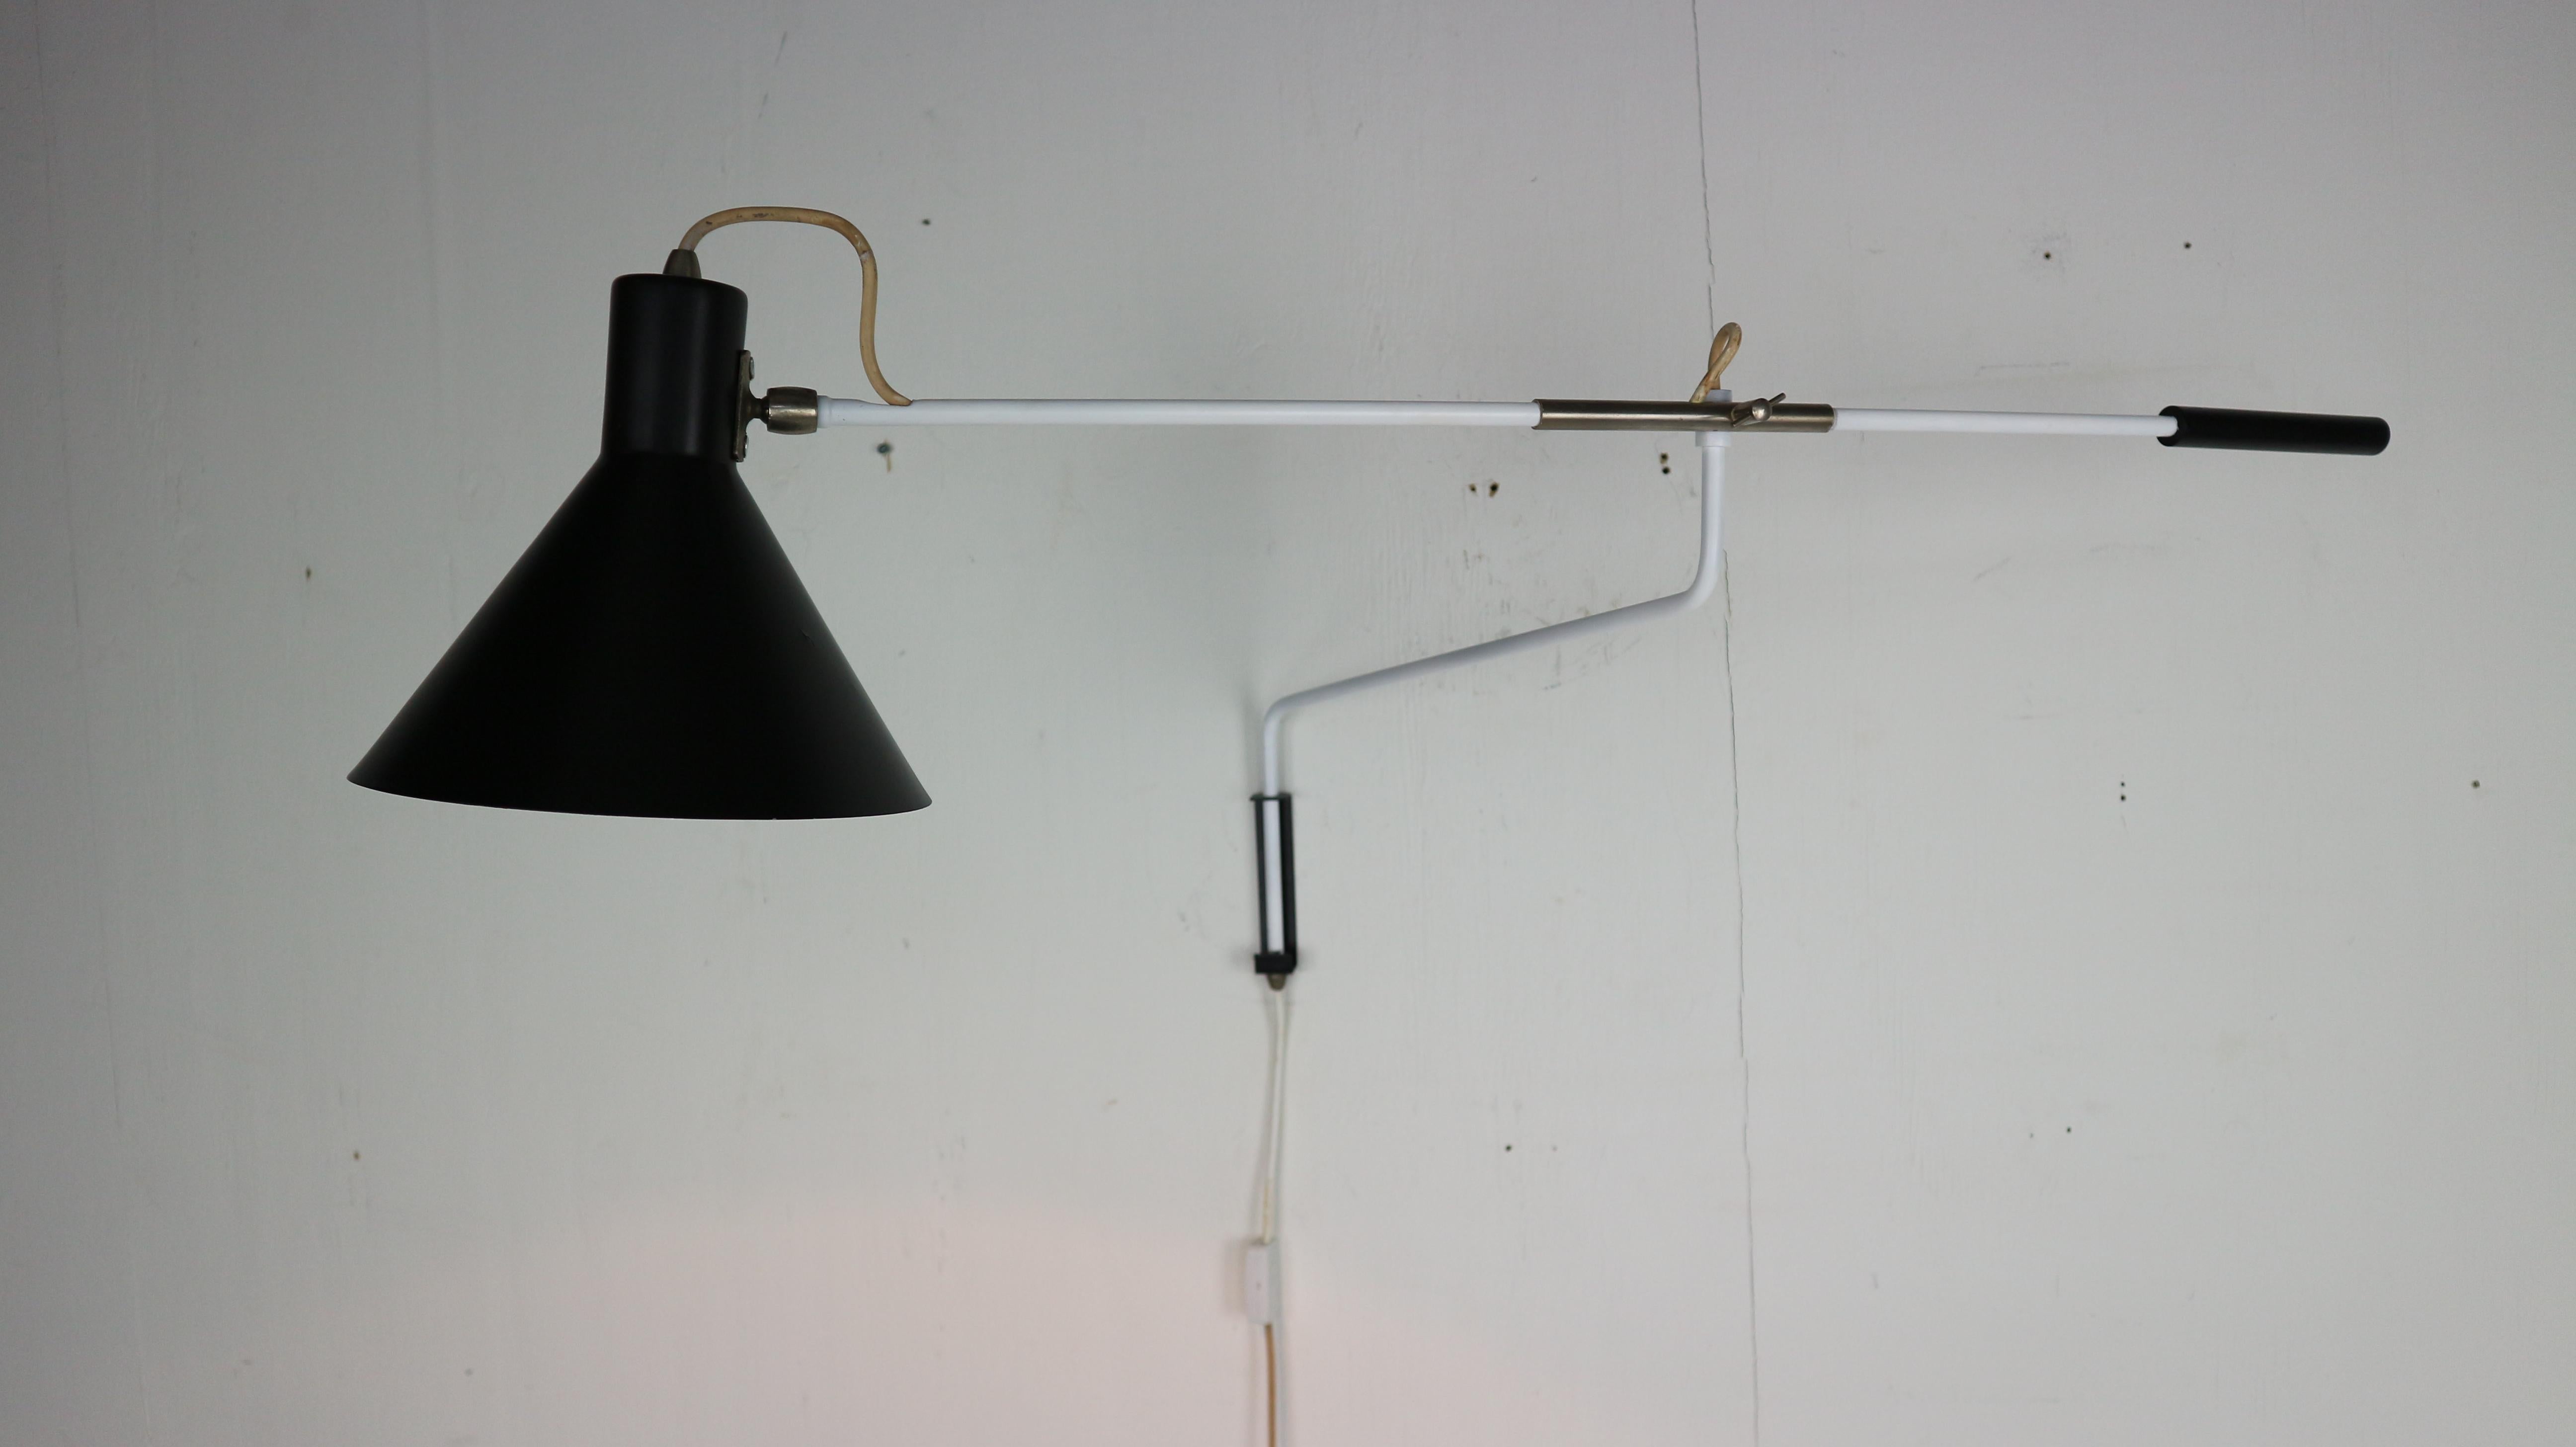 Nice and impressive sculptural counter balance wall lamp designed by J. J. M. Hoogervorst for Anvia Almelo, Holland, 1957. 
This amazing large wall lamp has an off white lacquered arm and black lacquered shade and weight. The lamp balances and